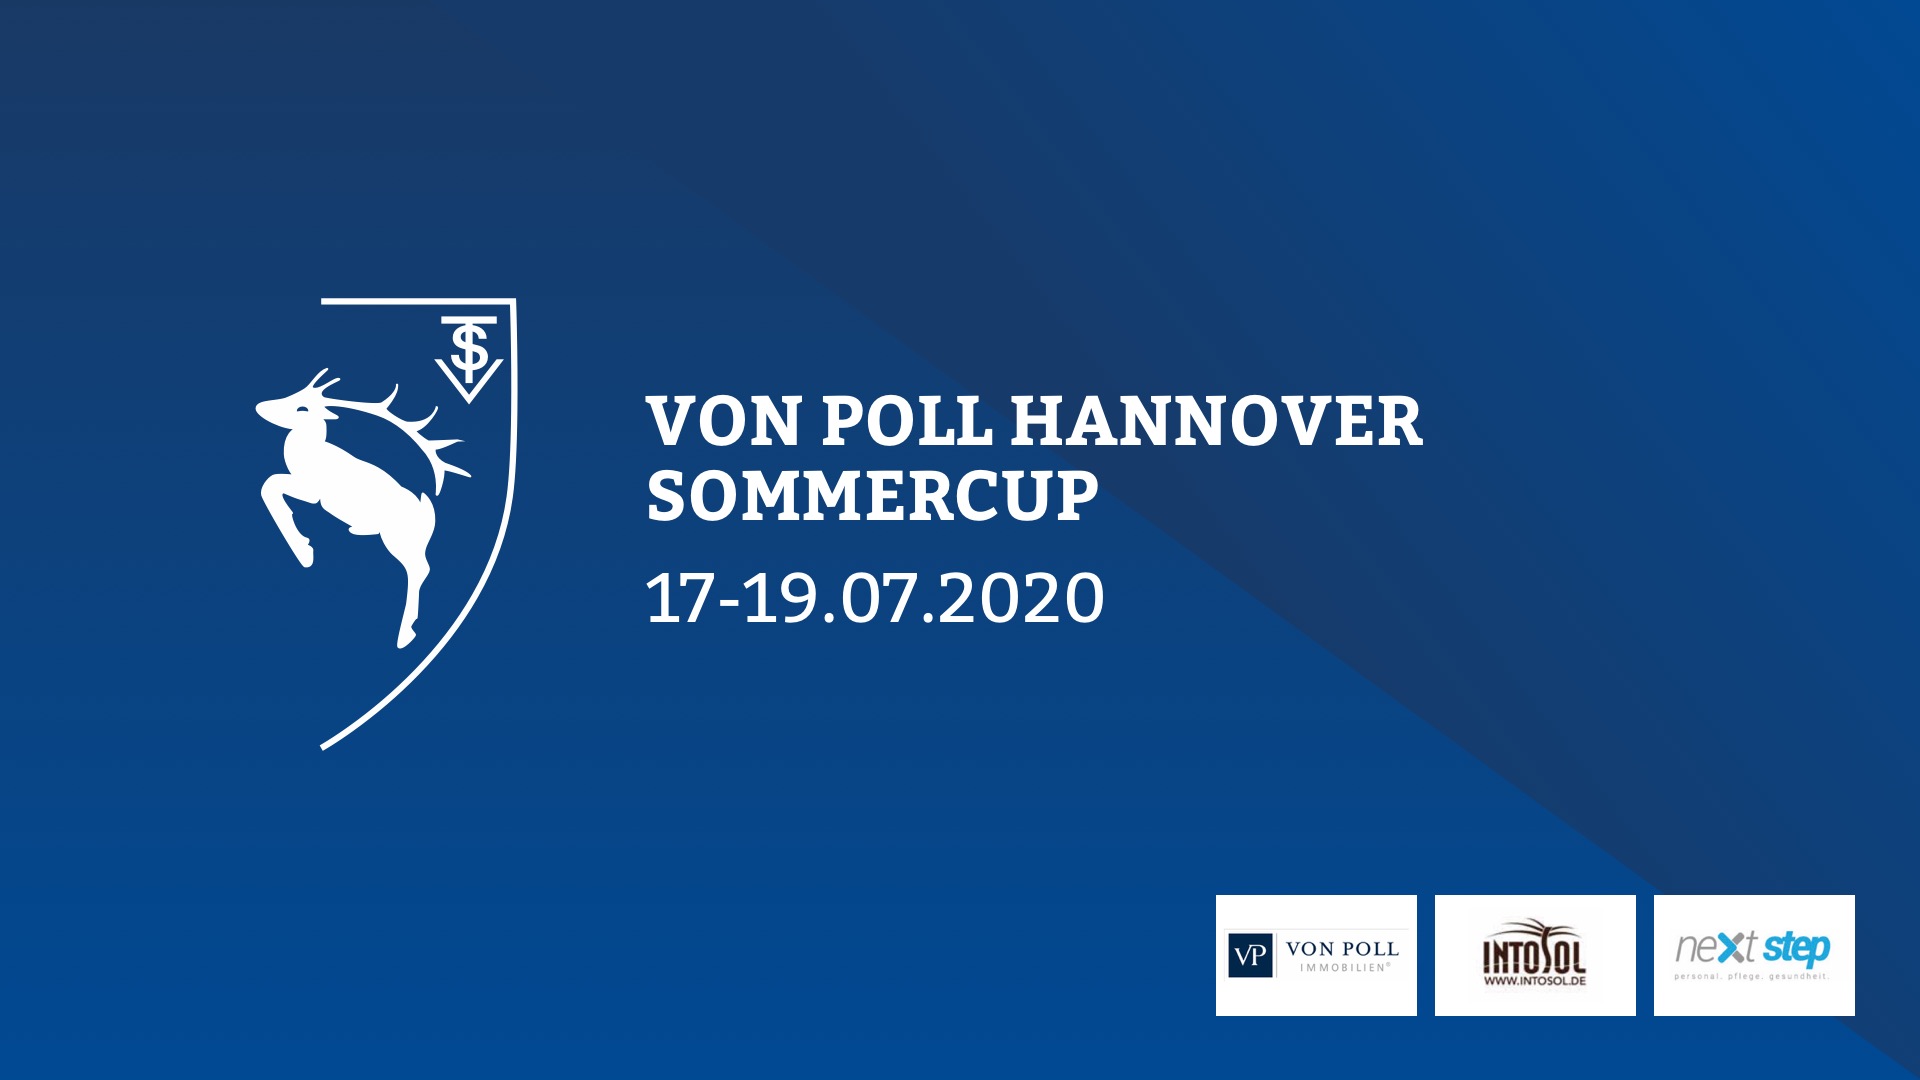 Featured image for “Von Poll Hannover Sommercup”